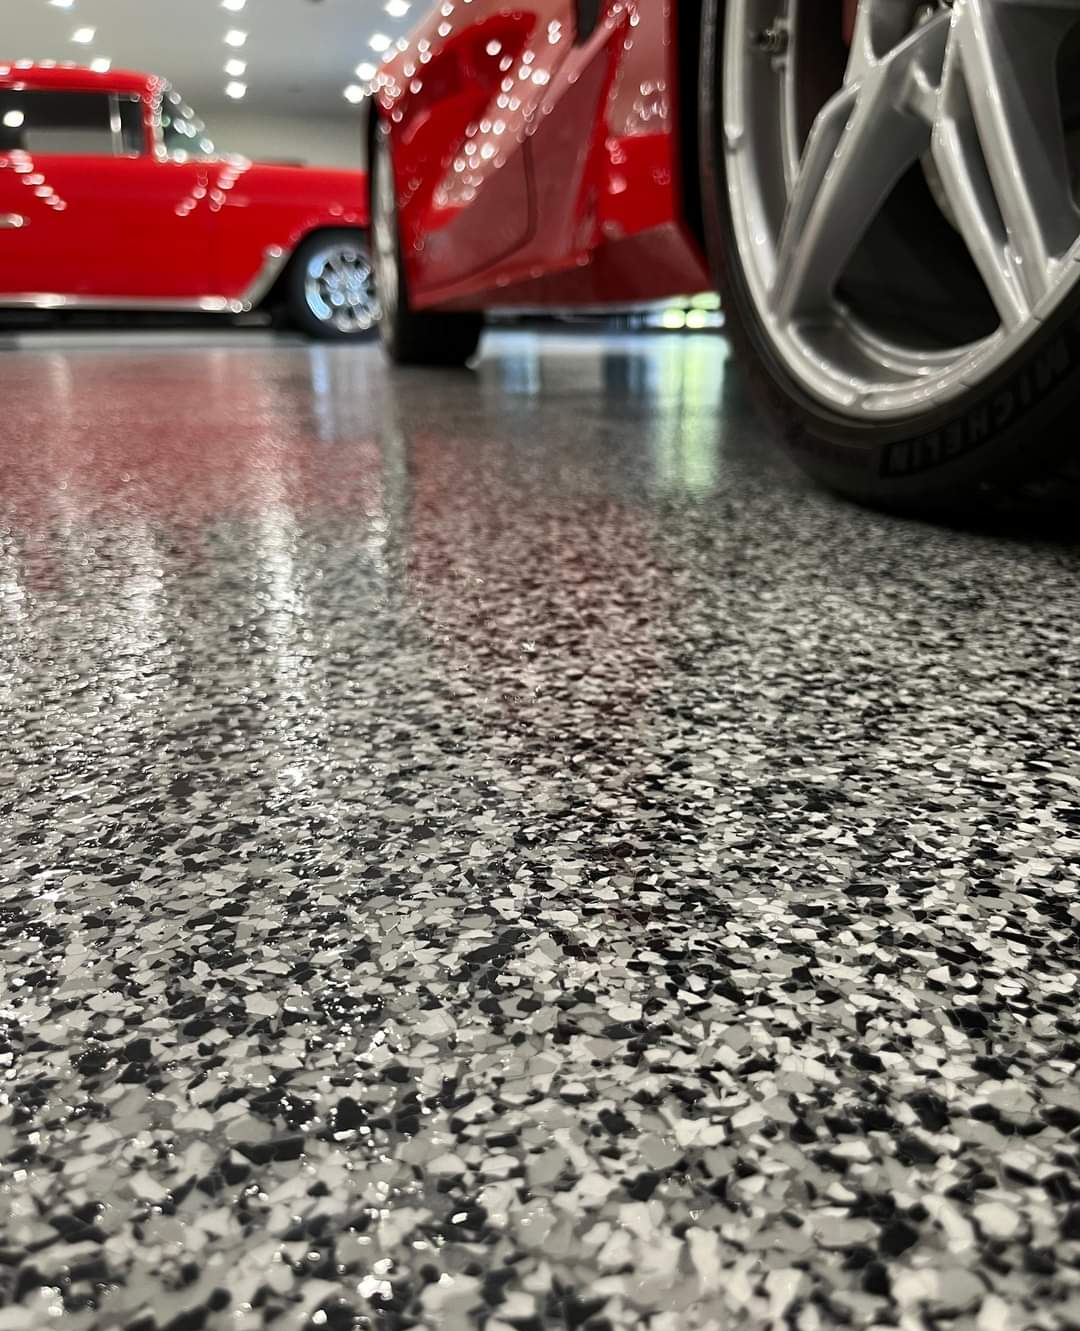 The same garage with epoxy floors, it has cured enough for the cars to be parked inside.